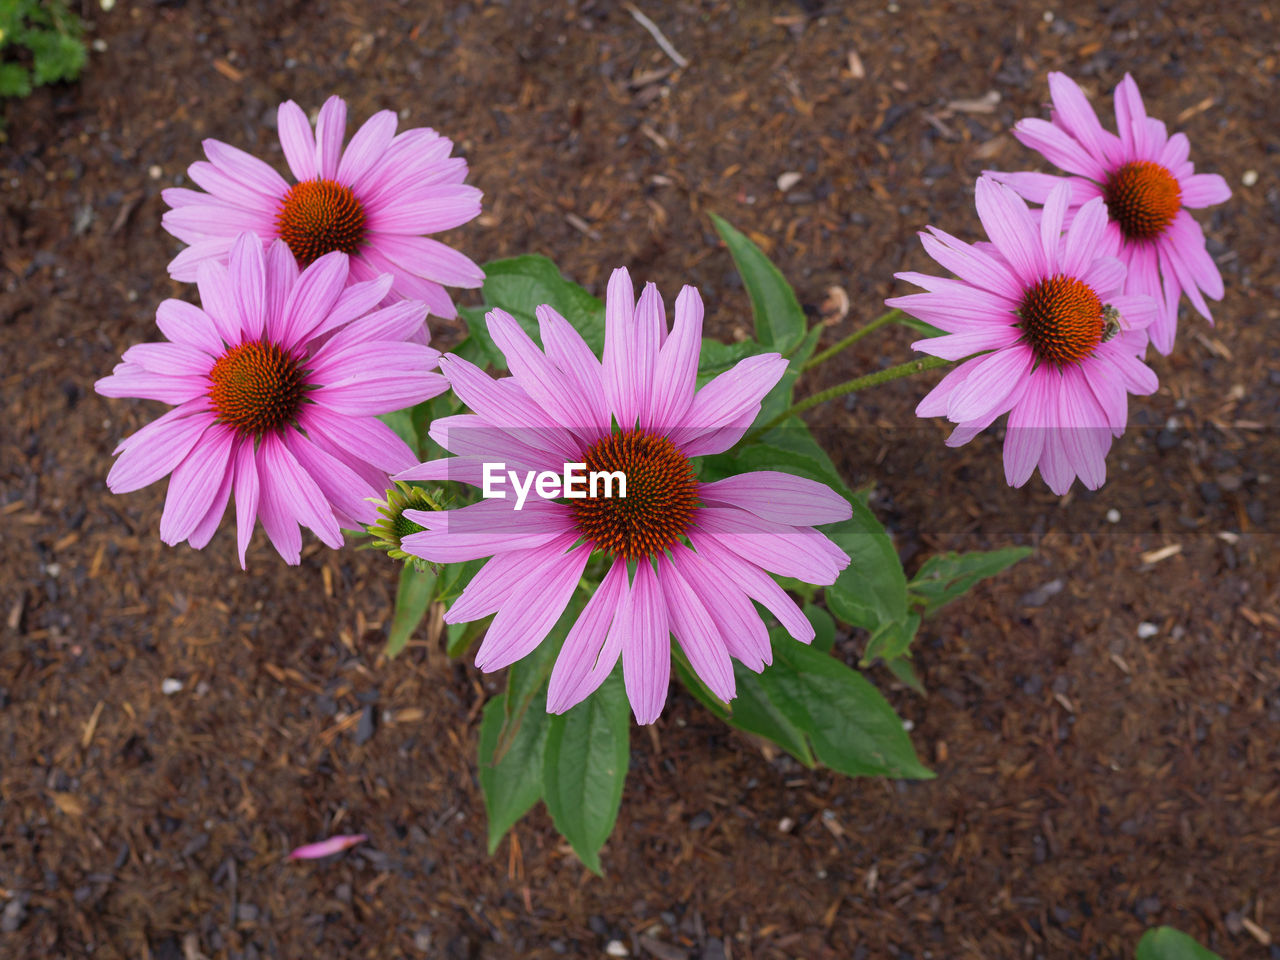 flower, flowering plant, plant, freshness, beauty in nature, petal, flower head, pink, inflorescence, fragility, nature, growth, close-up, high angle view, pollen, no people, land, day, field, outdoors, purple, daisy